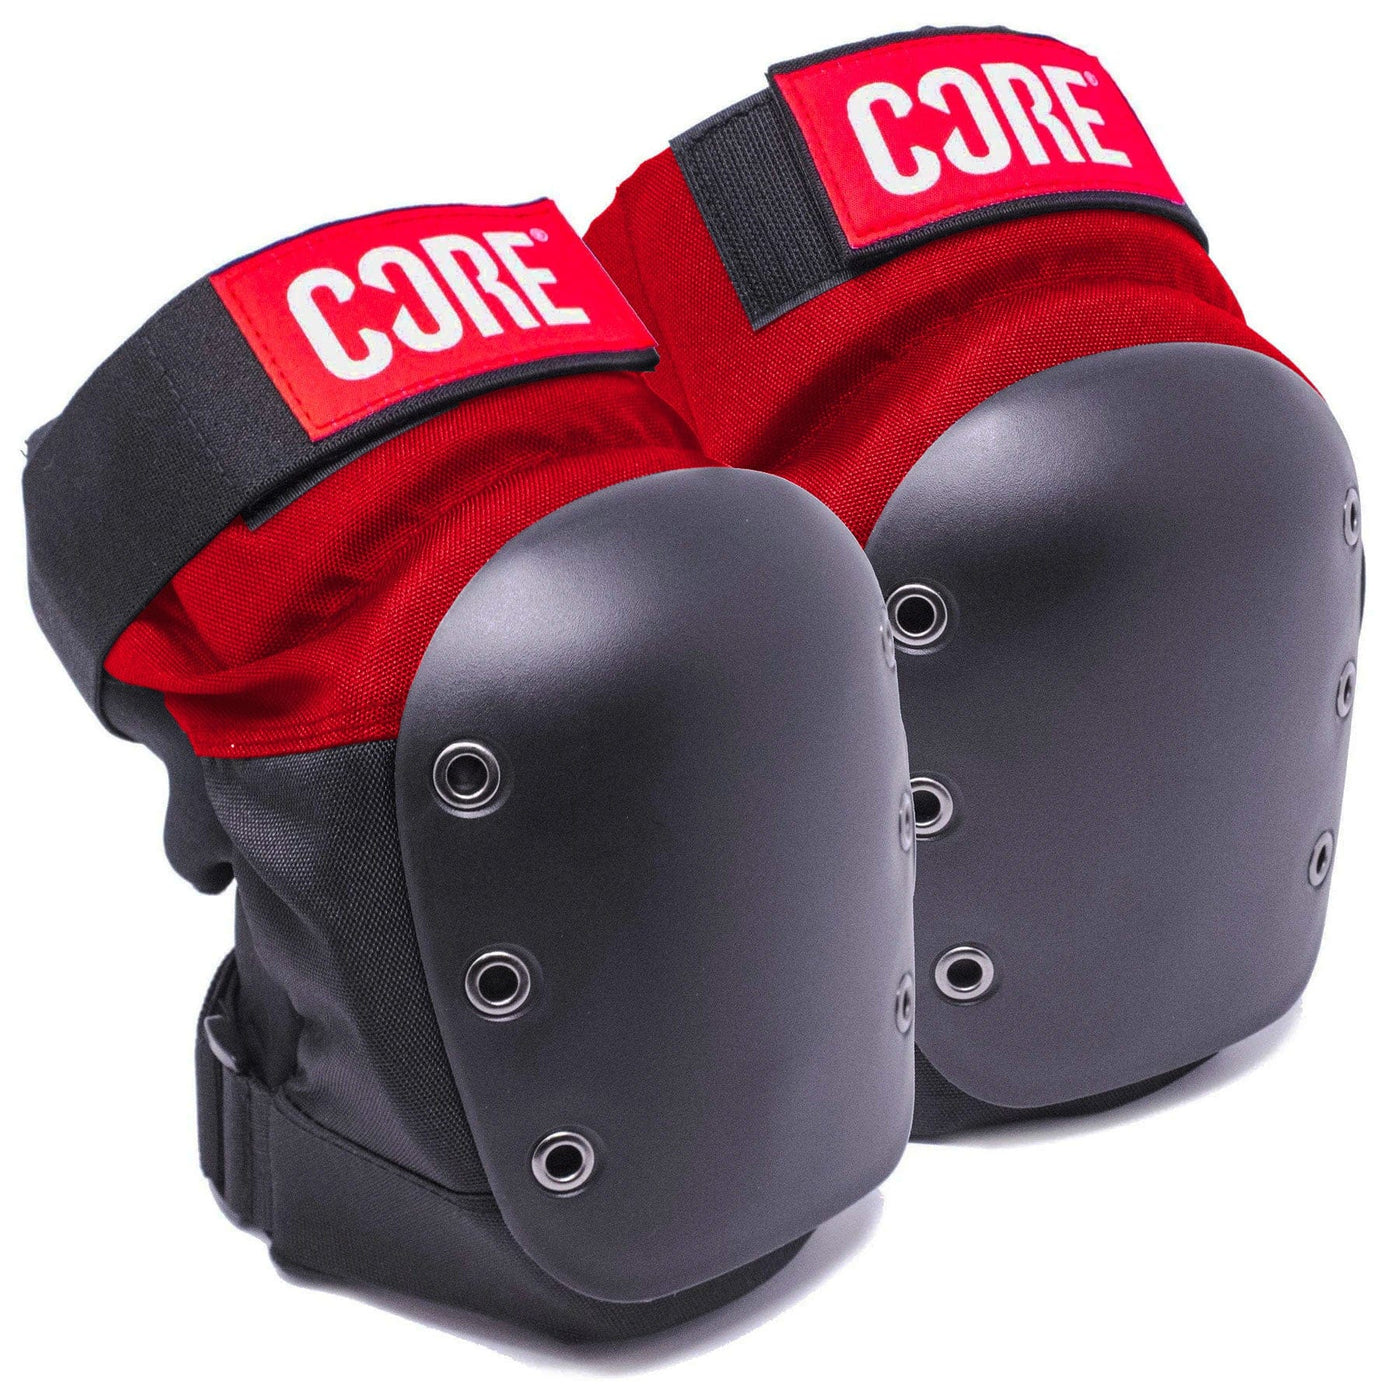 CORE Black/Red Pro Protection I Skate Knee Pads